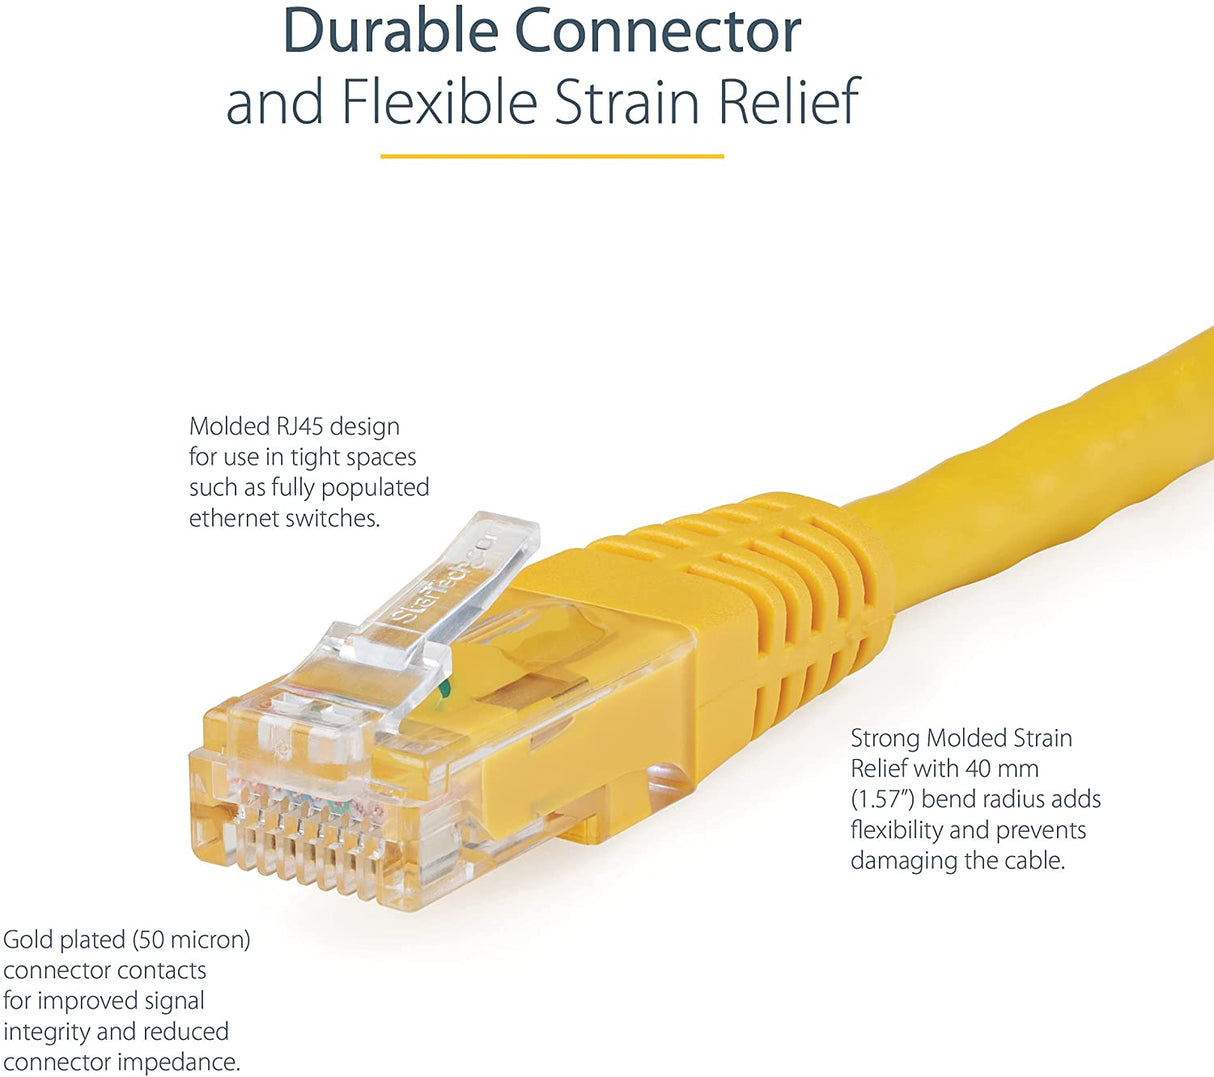 StarTech.com 15ft CAT6 Ethernet Cable - Yellow CAT 6 Gigabit Ethernet Wire -650MHz 100W PoE++ RJ45 UTP Molded Category 6 Network/Patch Cord w/Strain Relief/Fluke Tested UL/TIA Certified (C6PATCH15YL) Yellow 15 ft / 4.5 m 1 Pack